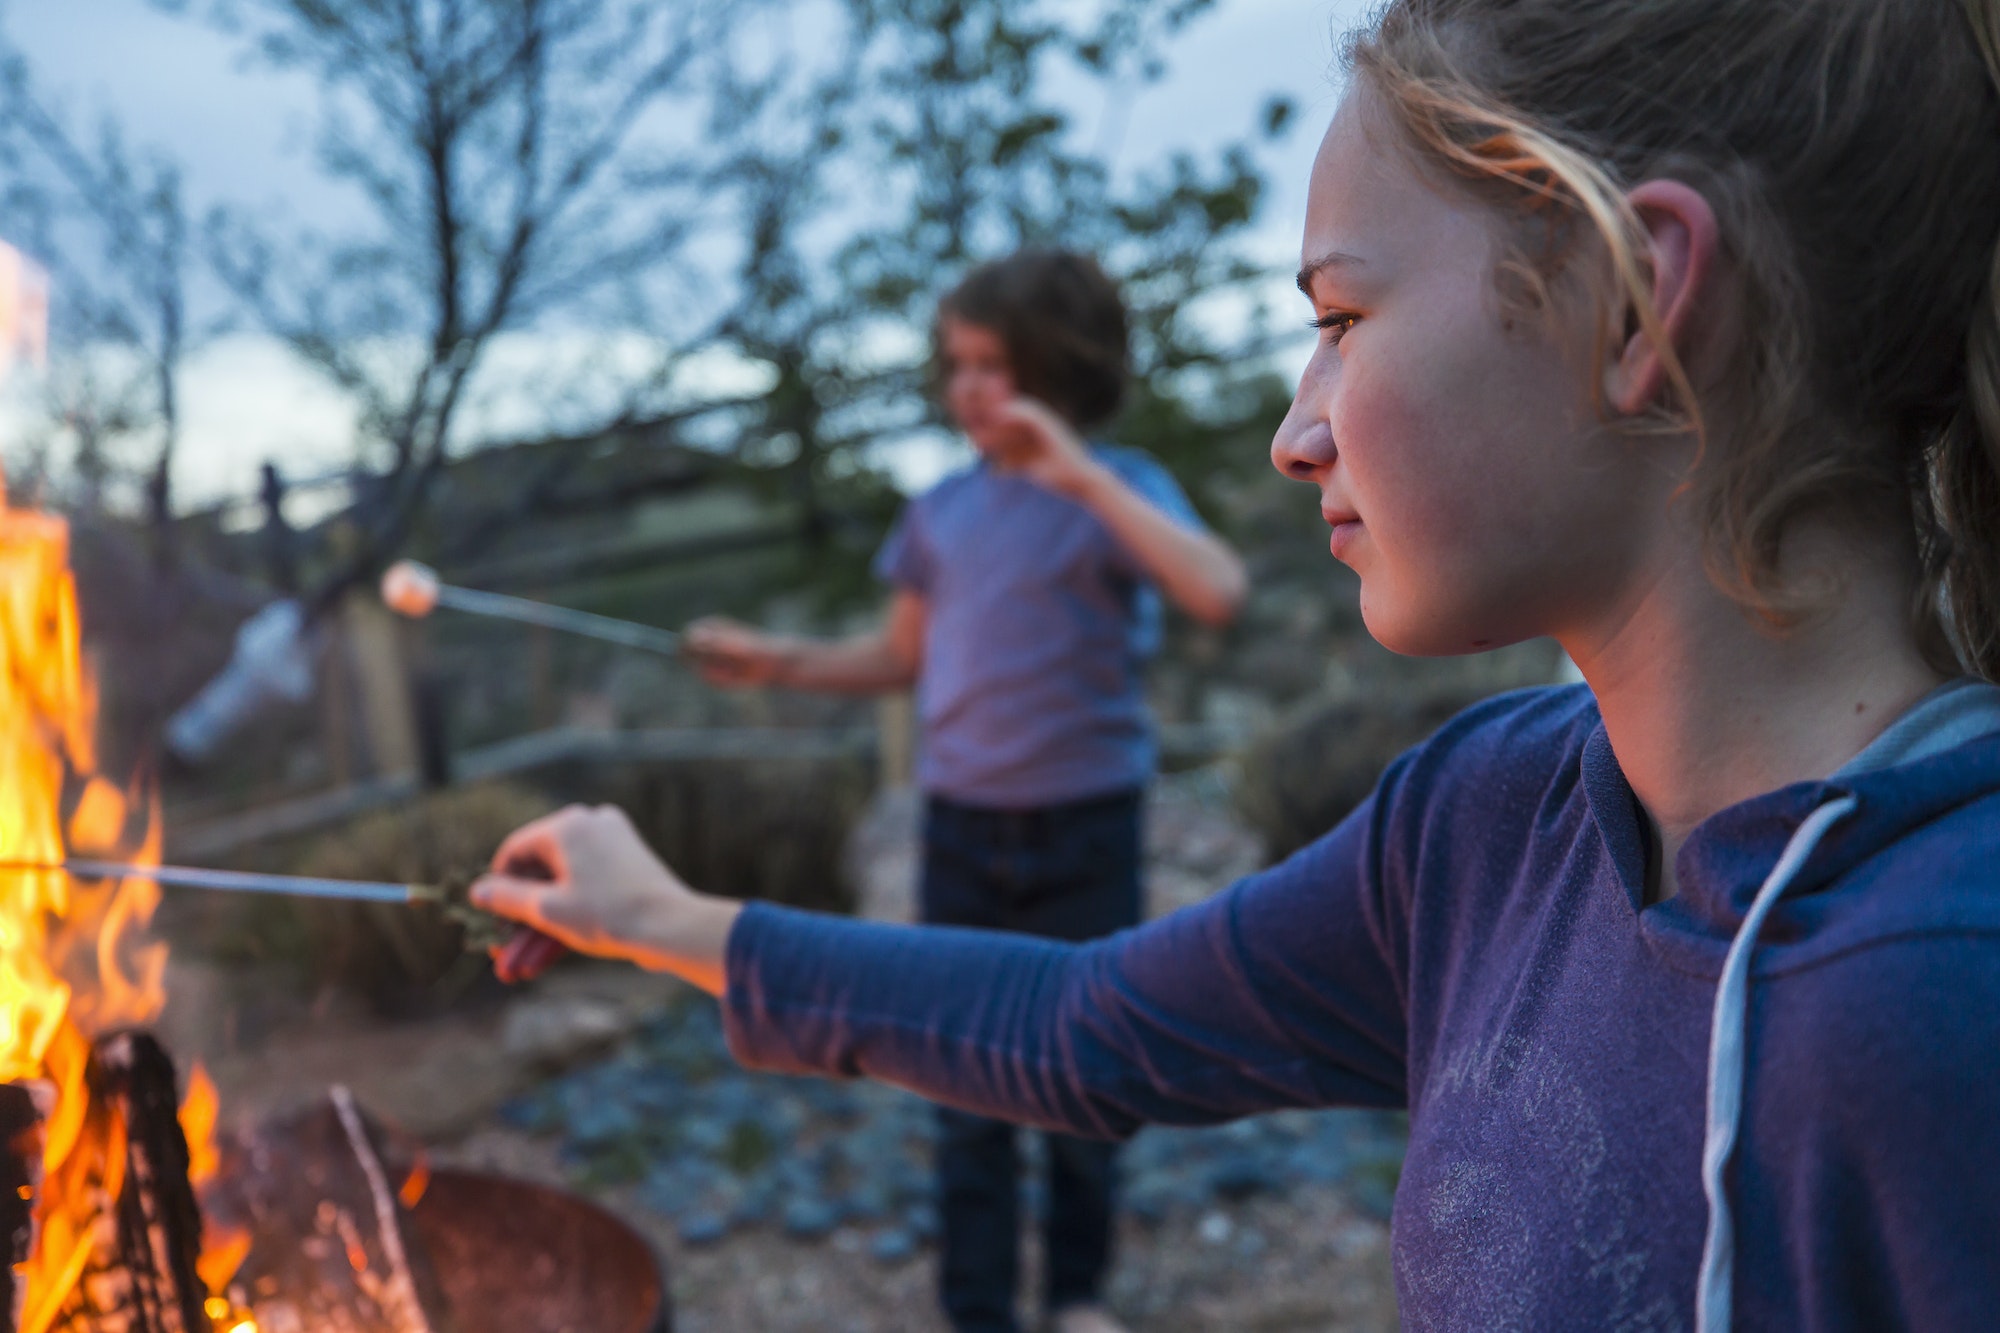 A teenage girl making smores with her brother over a fire in a garden at dusk.